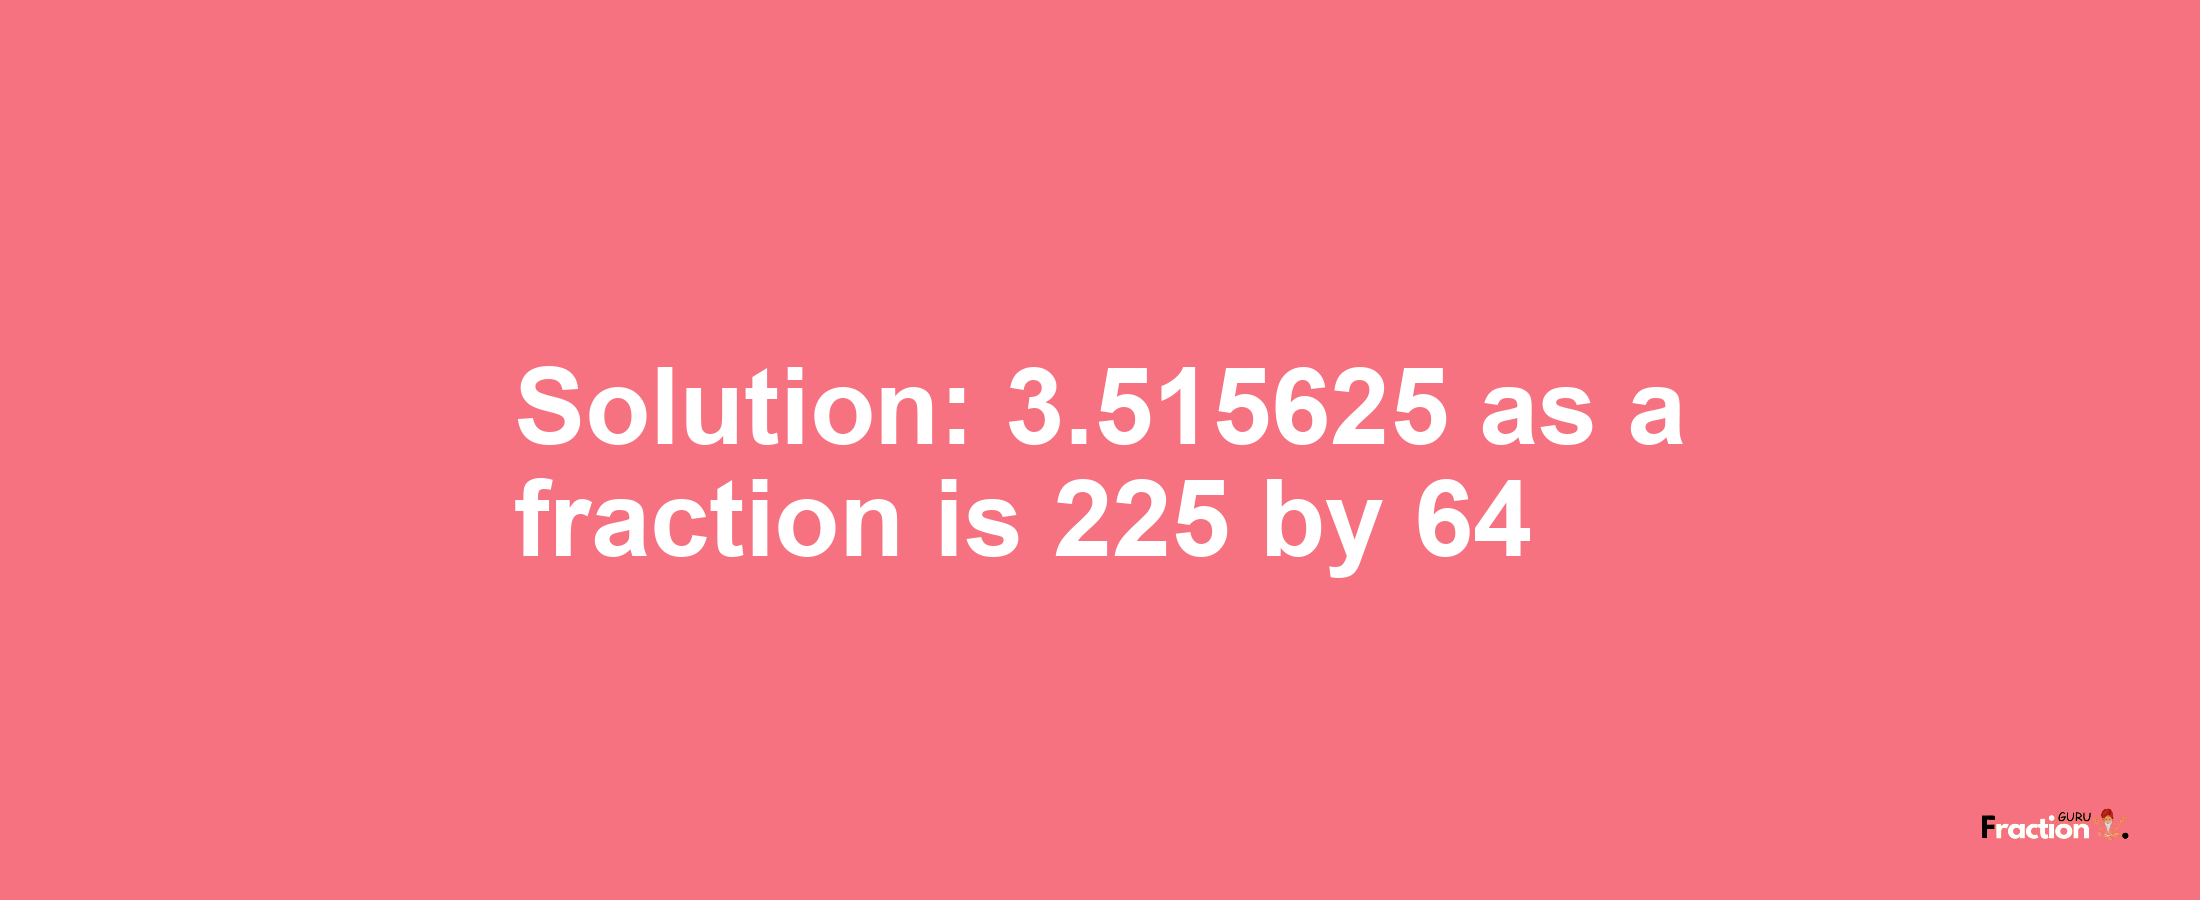 Solution:3.515625 as a fraction is 225/64